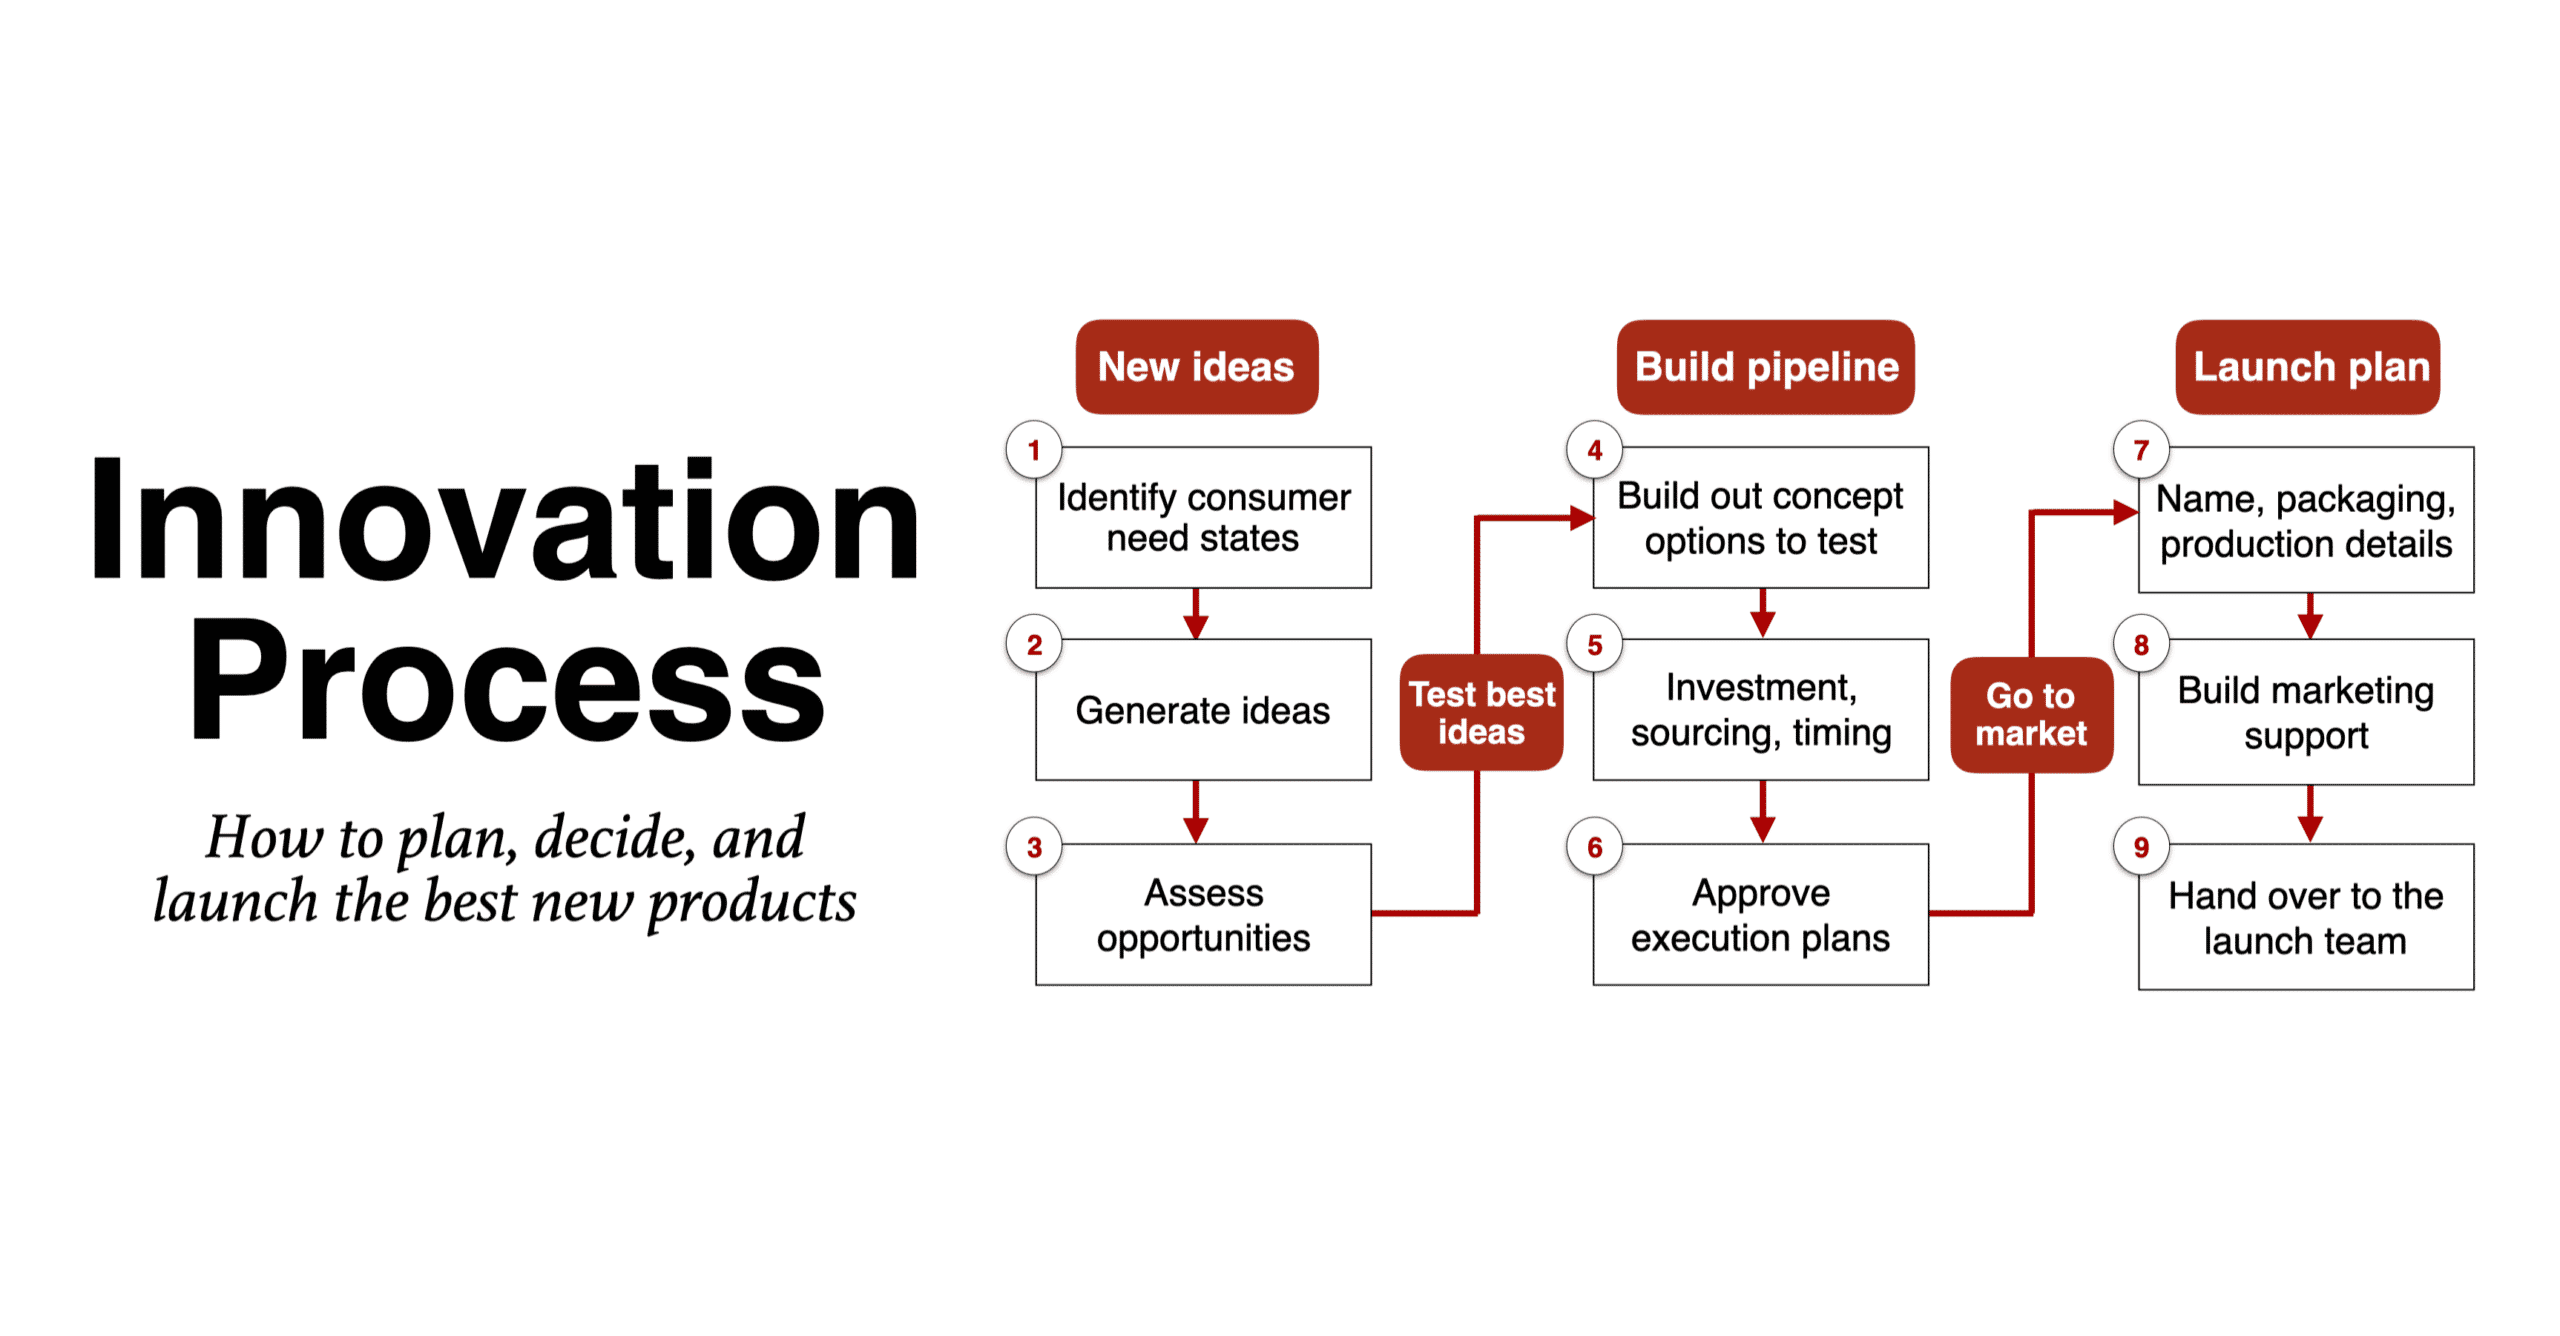 Innovation process to generate ideas for new product launches